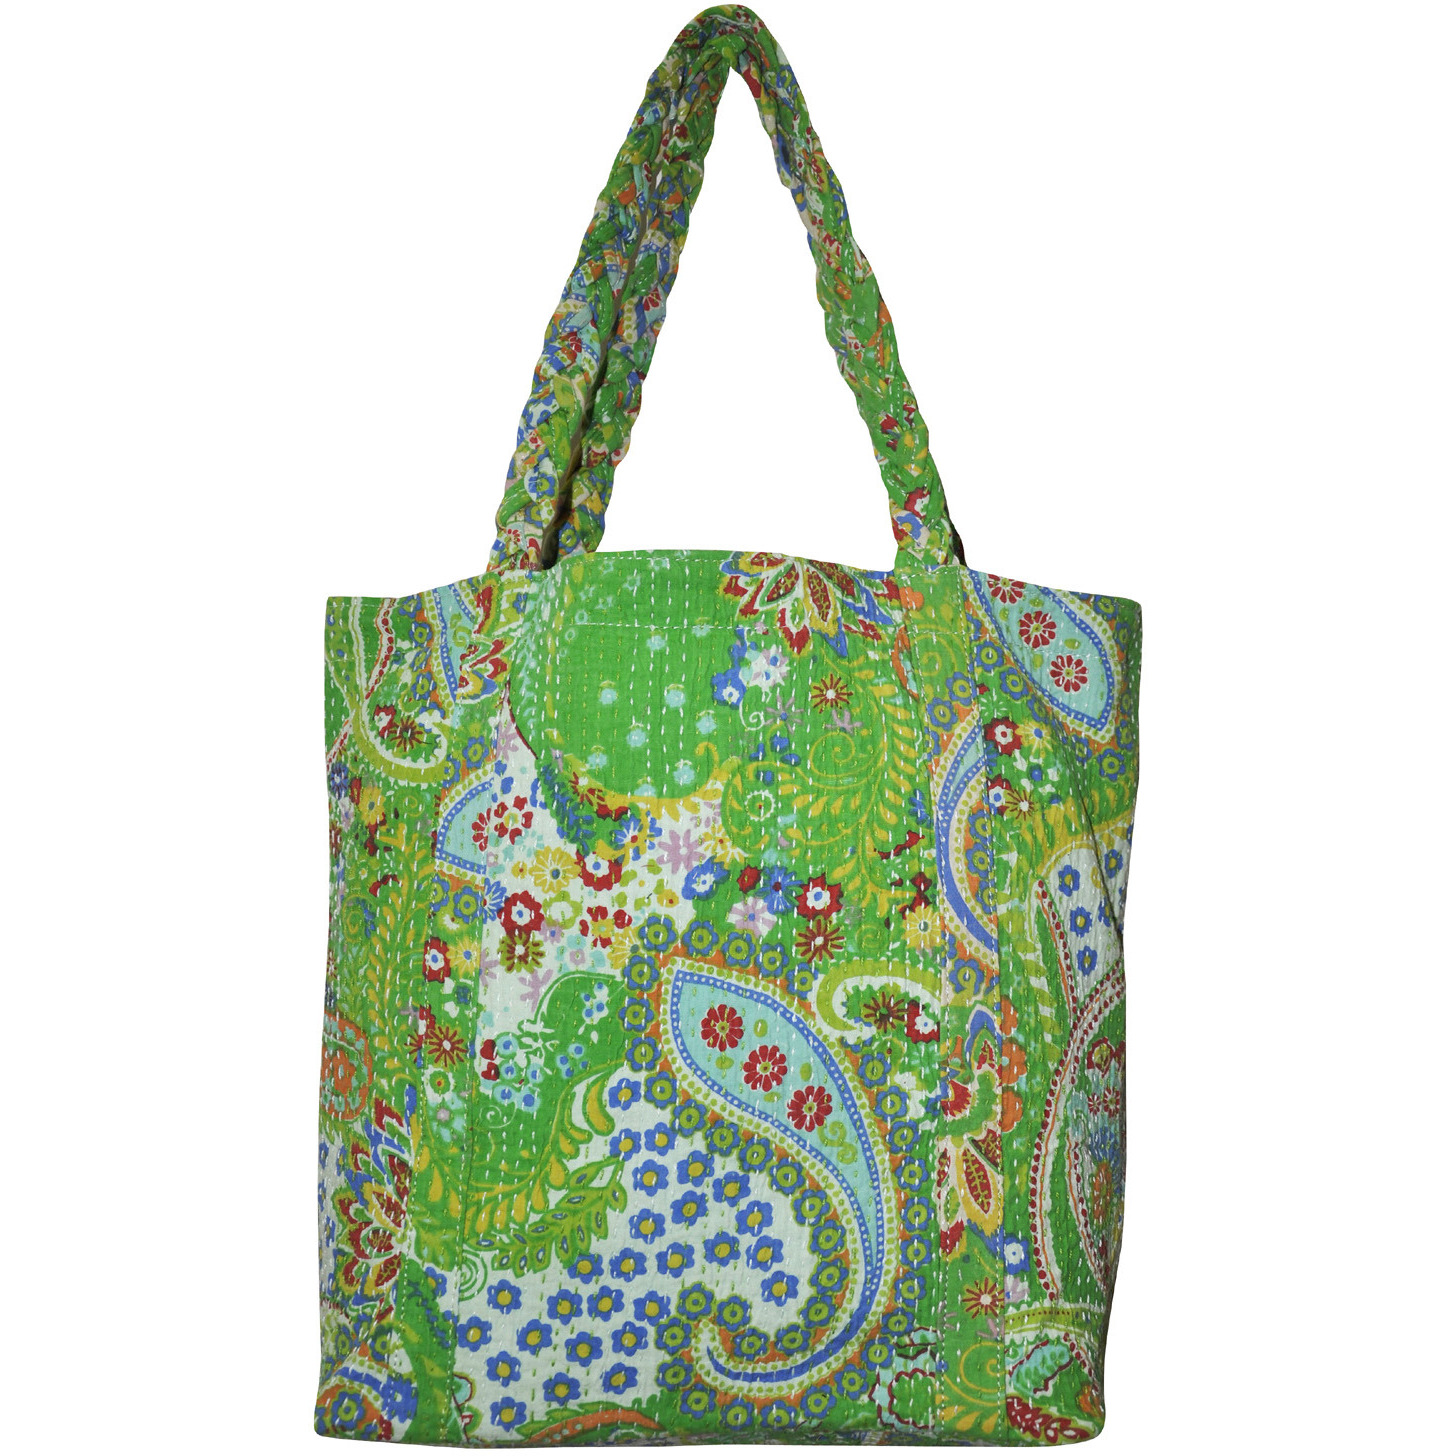 Printed Bag Green Floral Cotton Shopping Tote Shoulder Bag Women's Gift 18 Inch